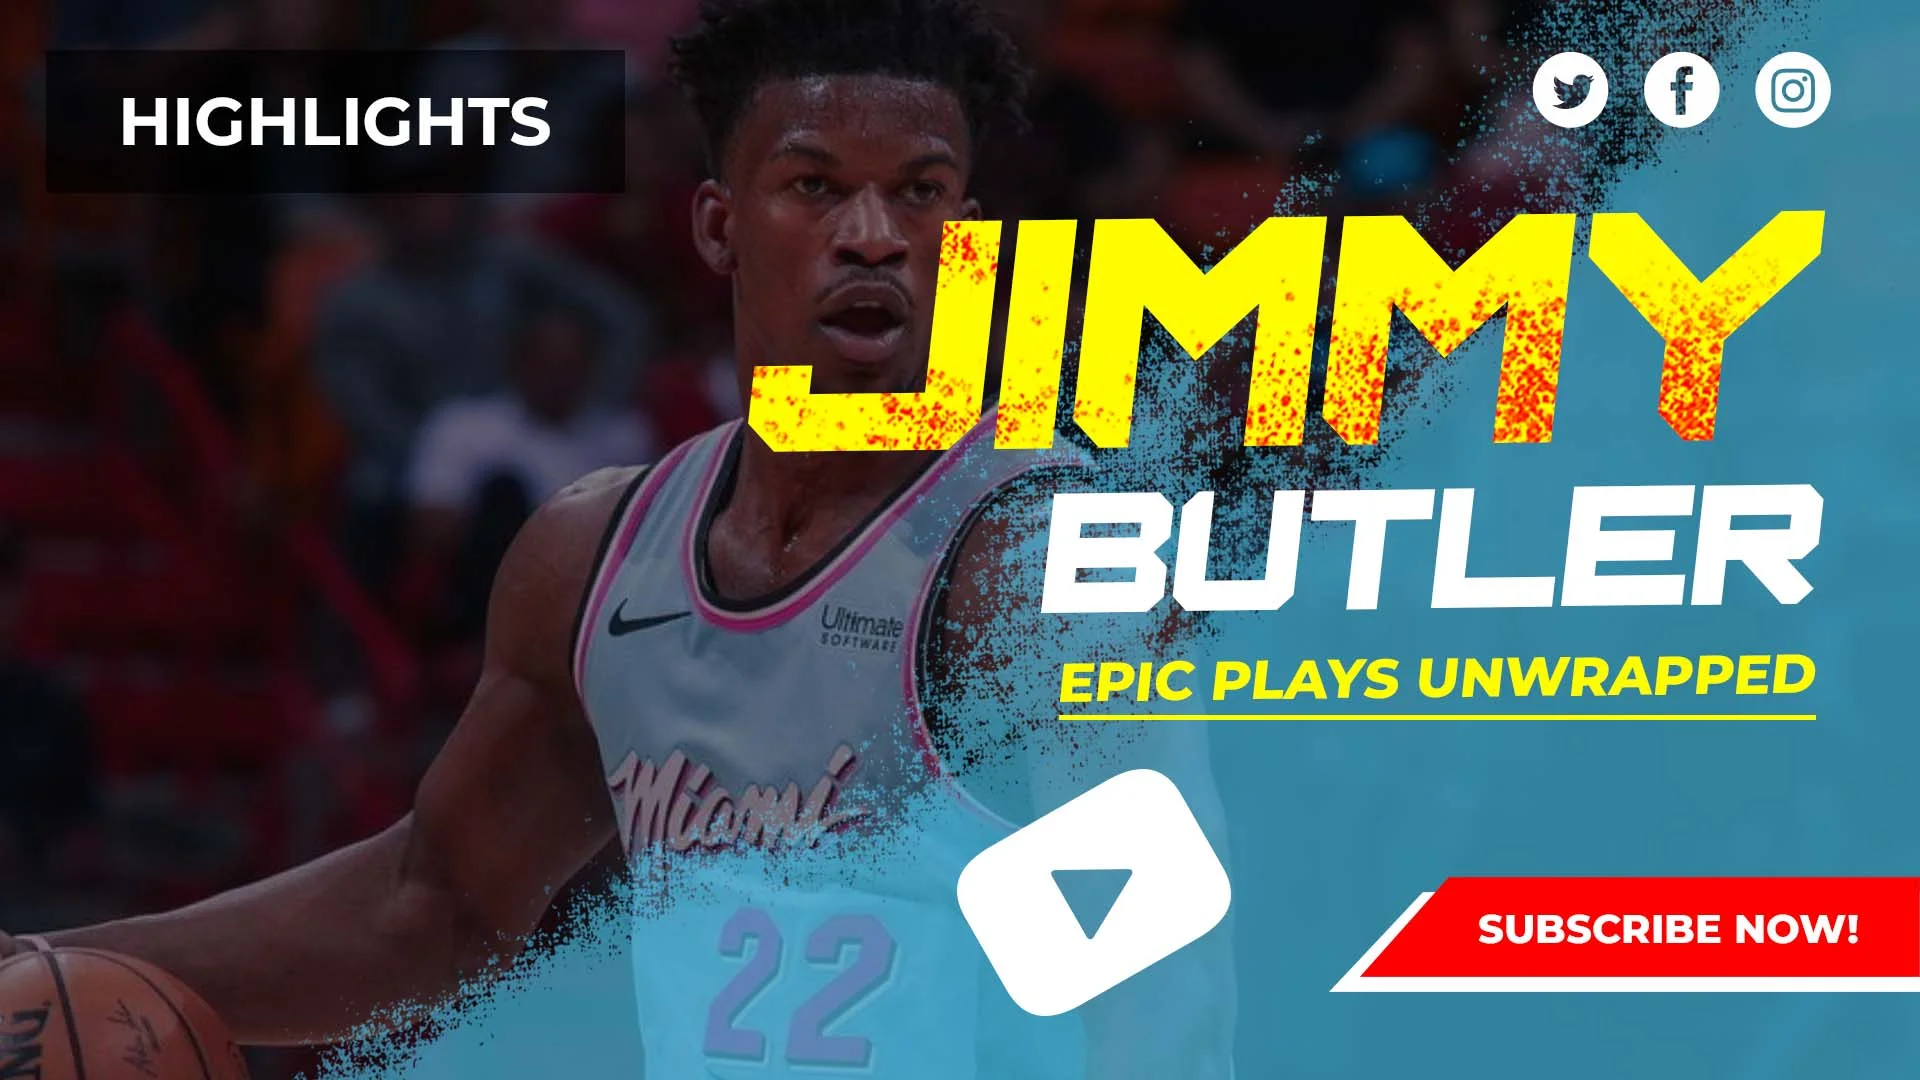 Epic Plays Unwrapped: Jimmy Butler Highlights Showcase